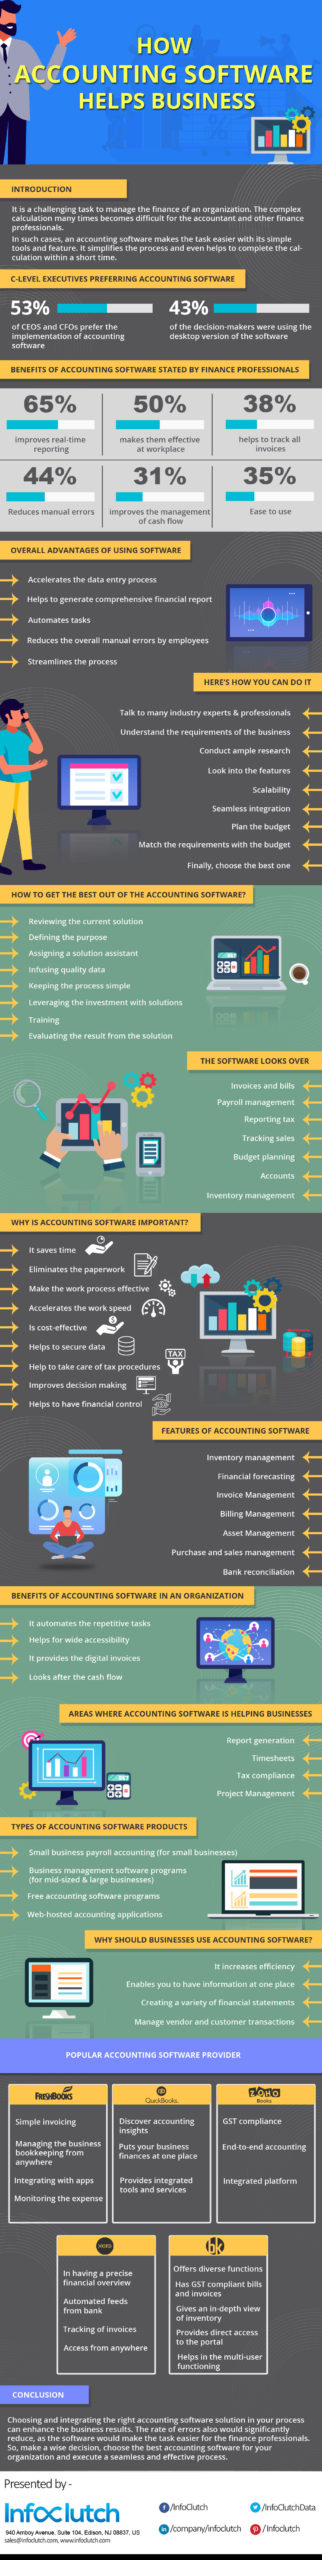 Infographic : How Accounting Software Helps Business?